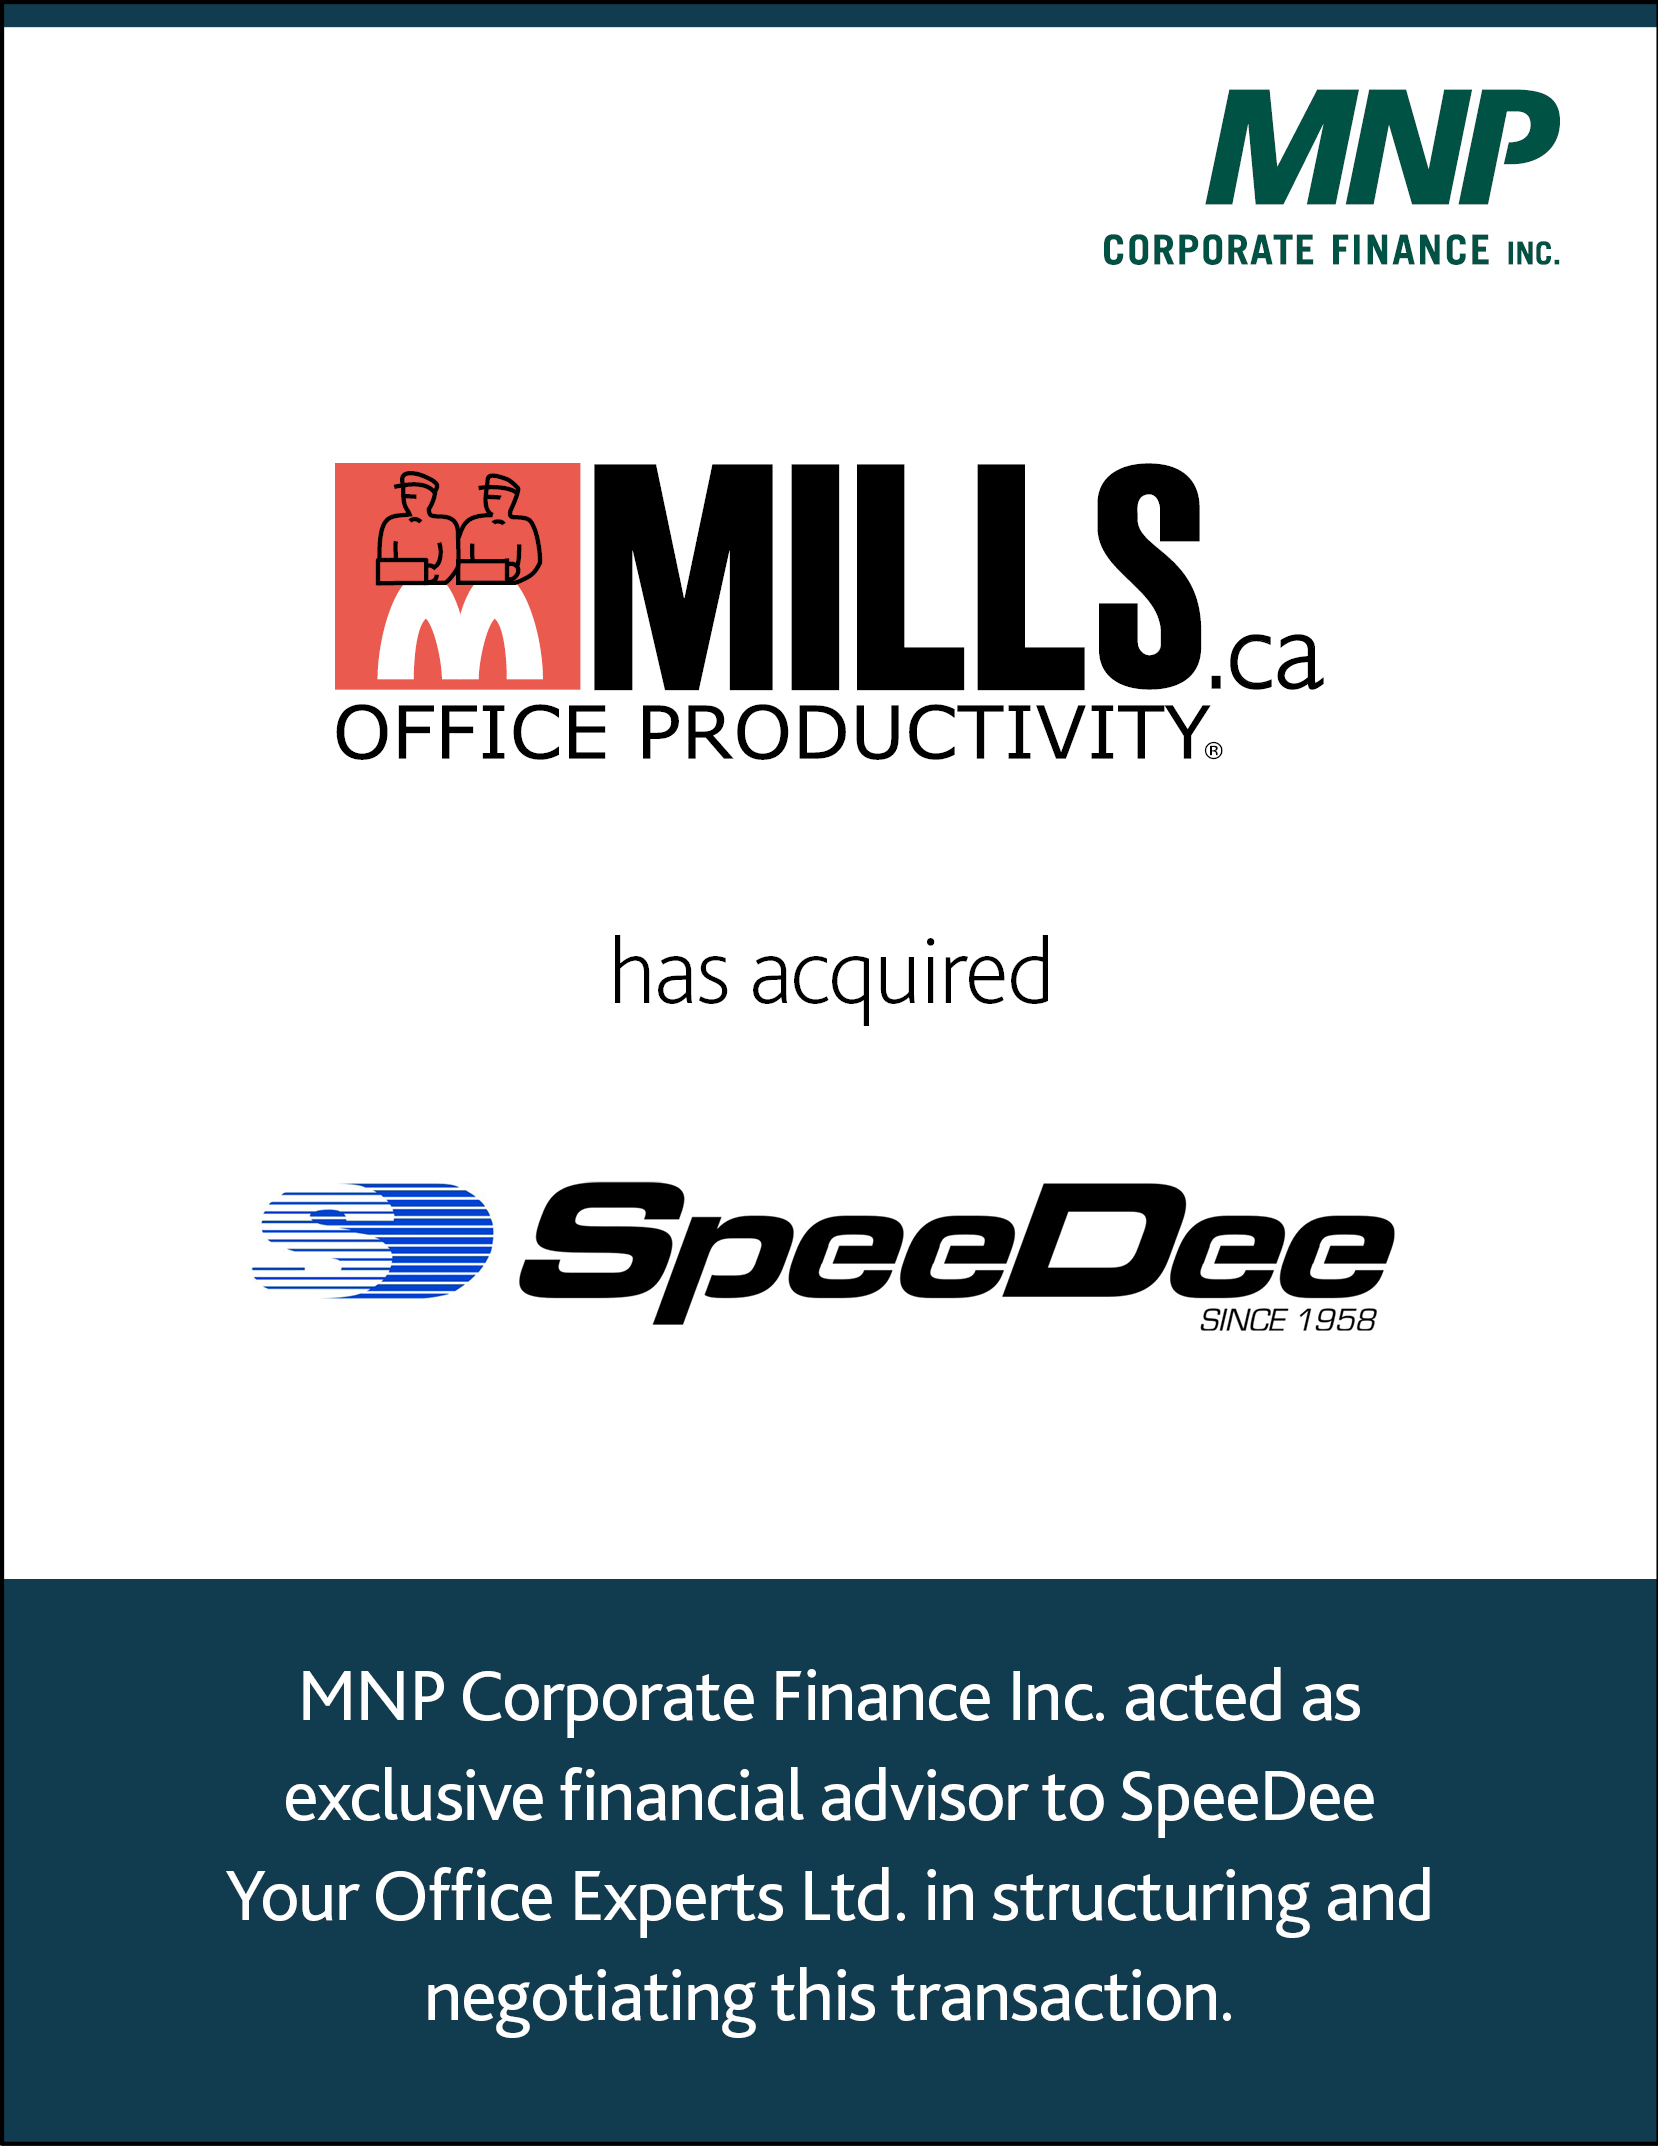 Mills Printing & Stationery Co. Ltd. has acquired SpeeDee Your Office Experts Ltd.